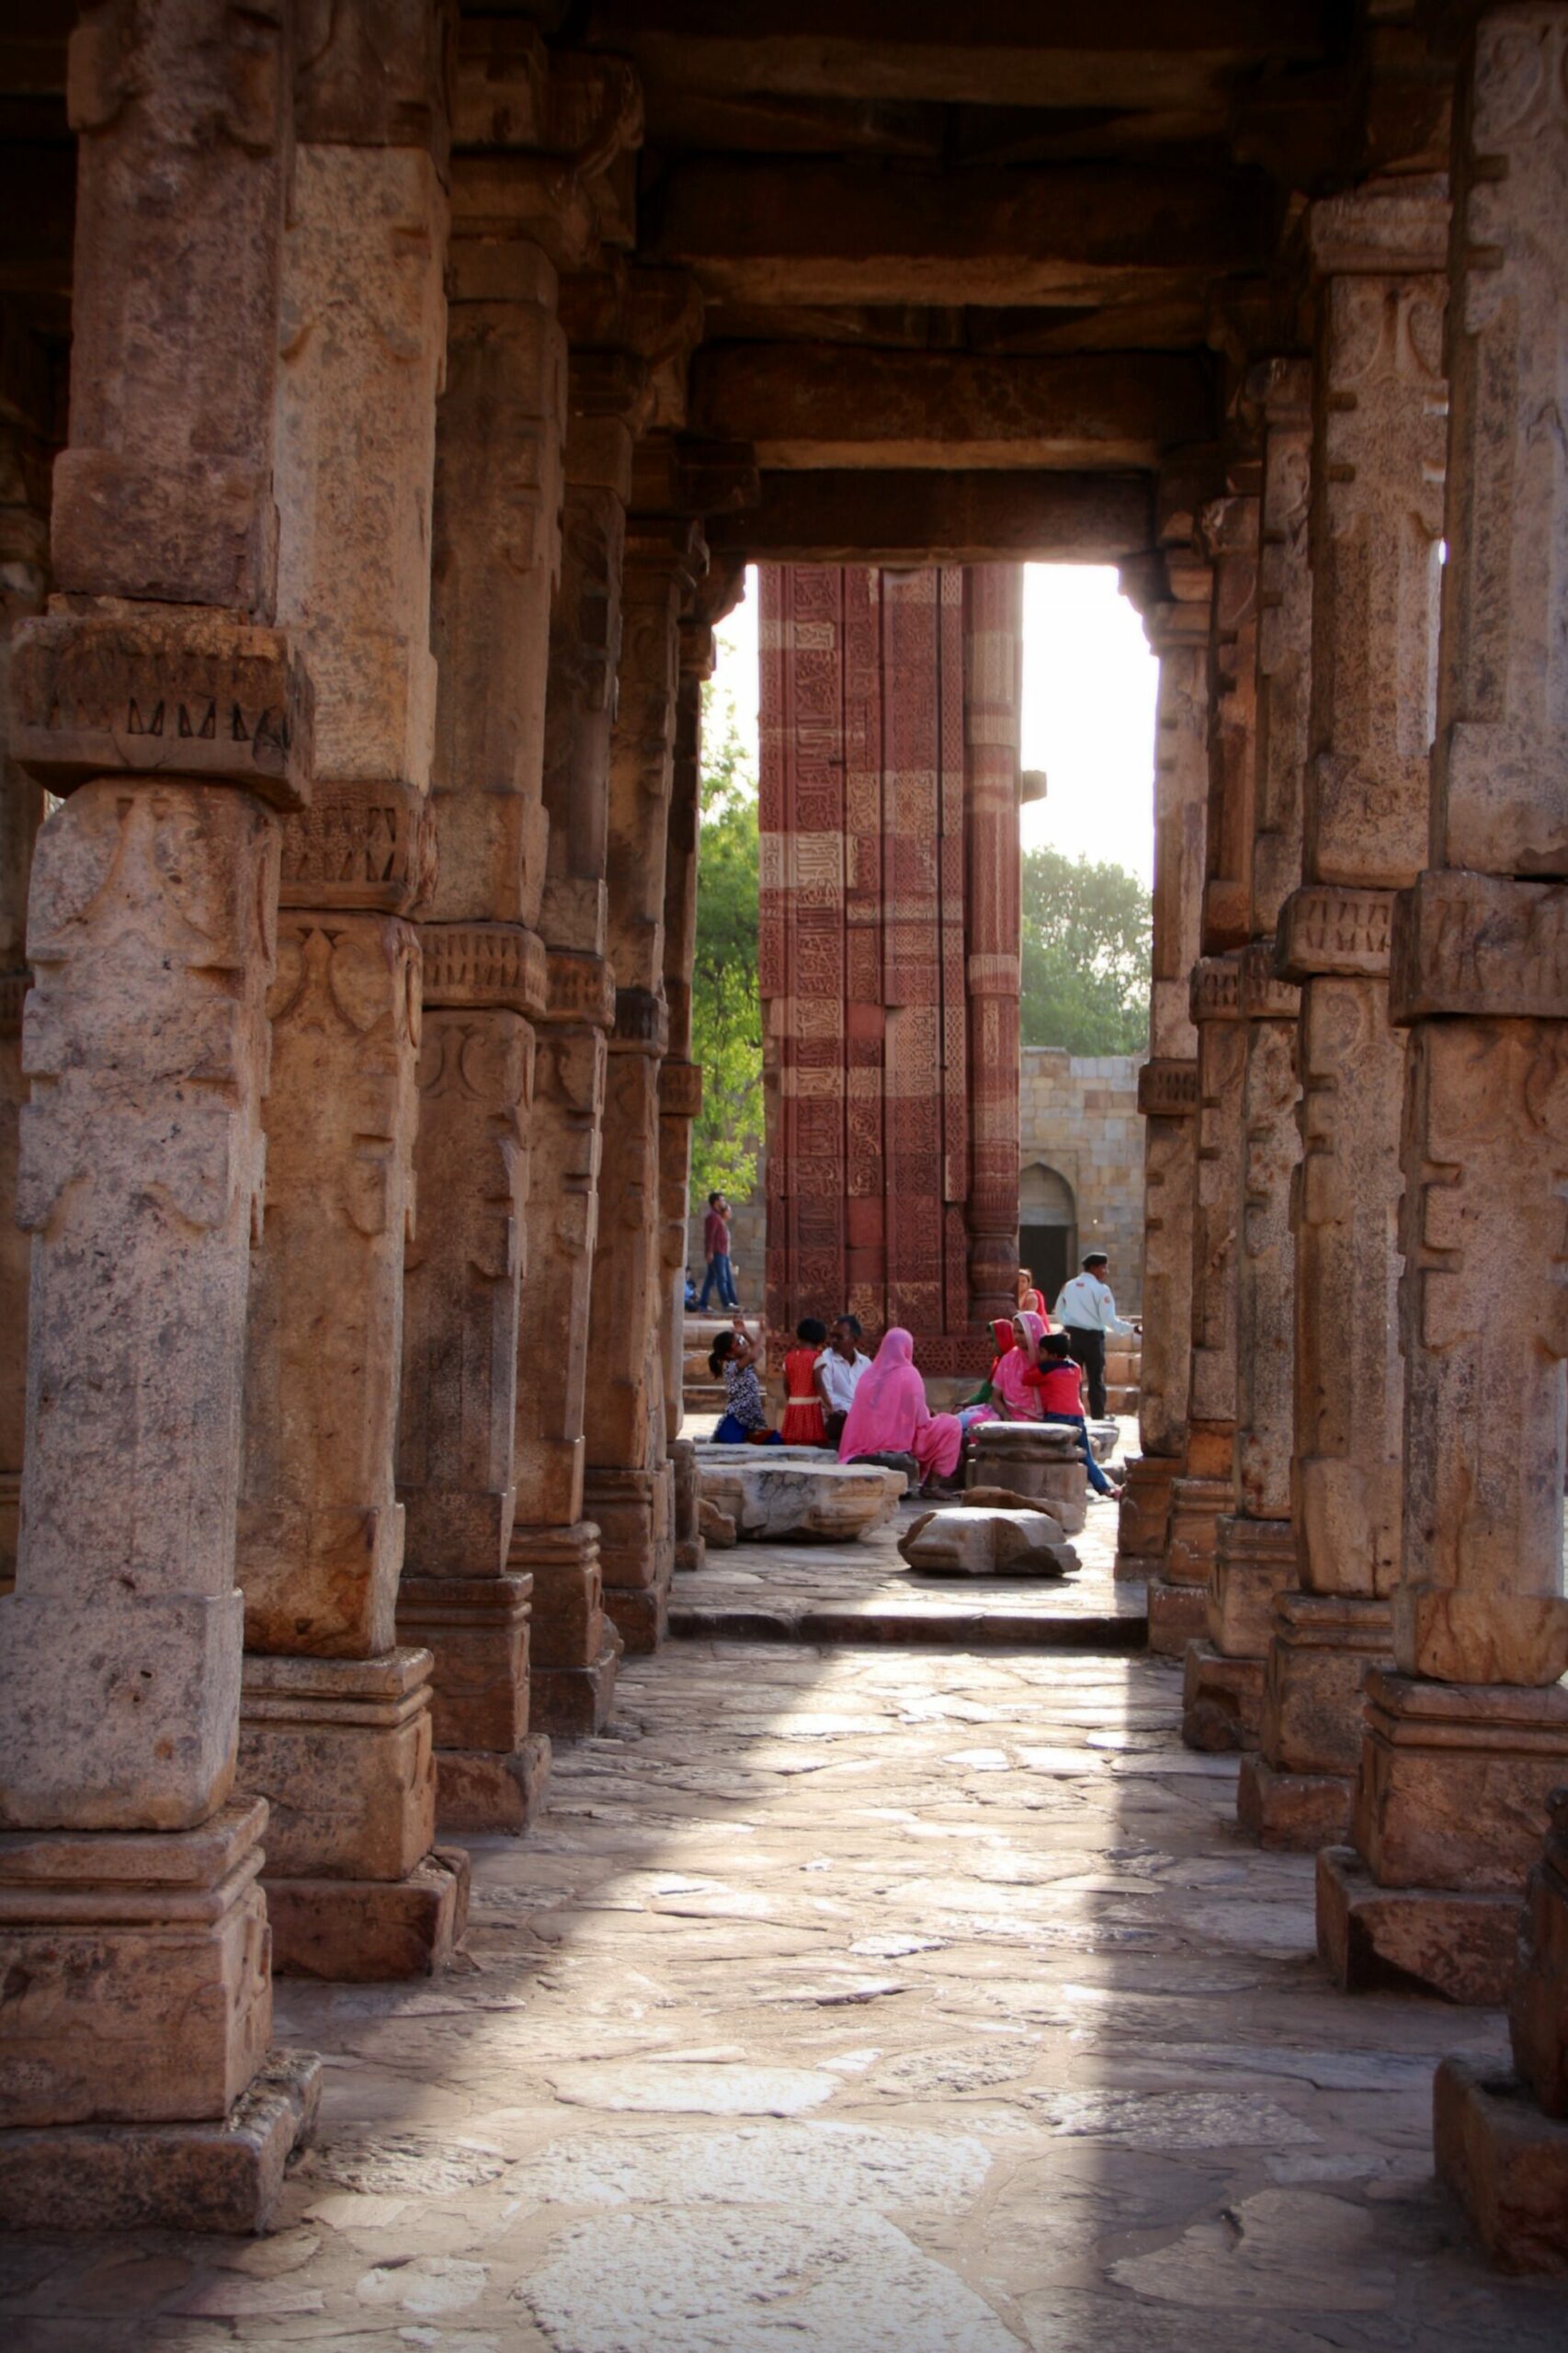 Pause ved Qutb Minar, India